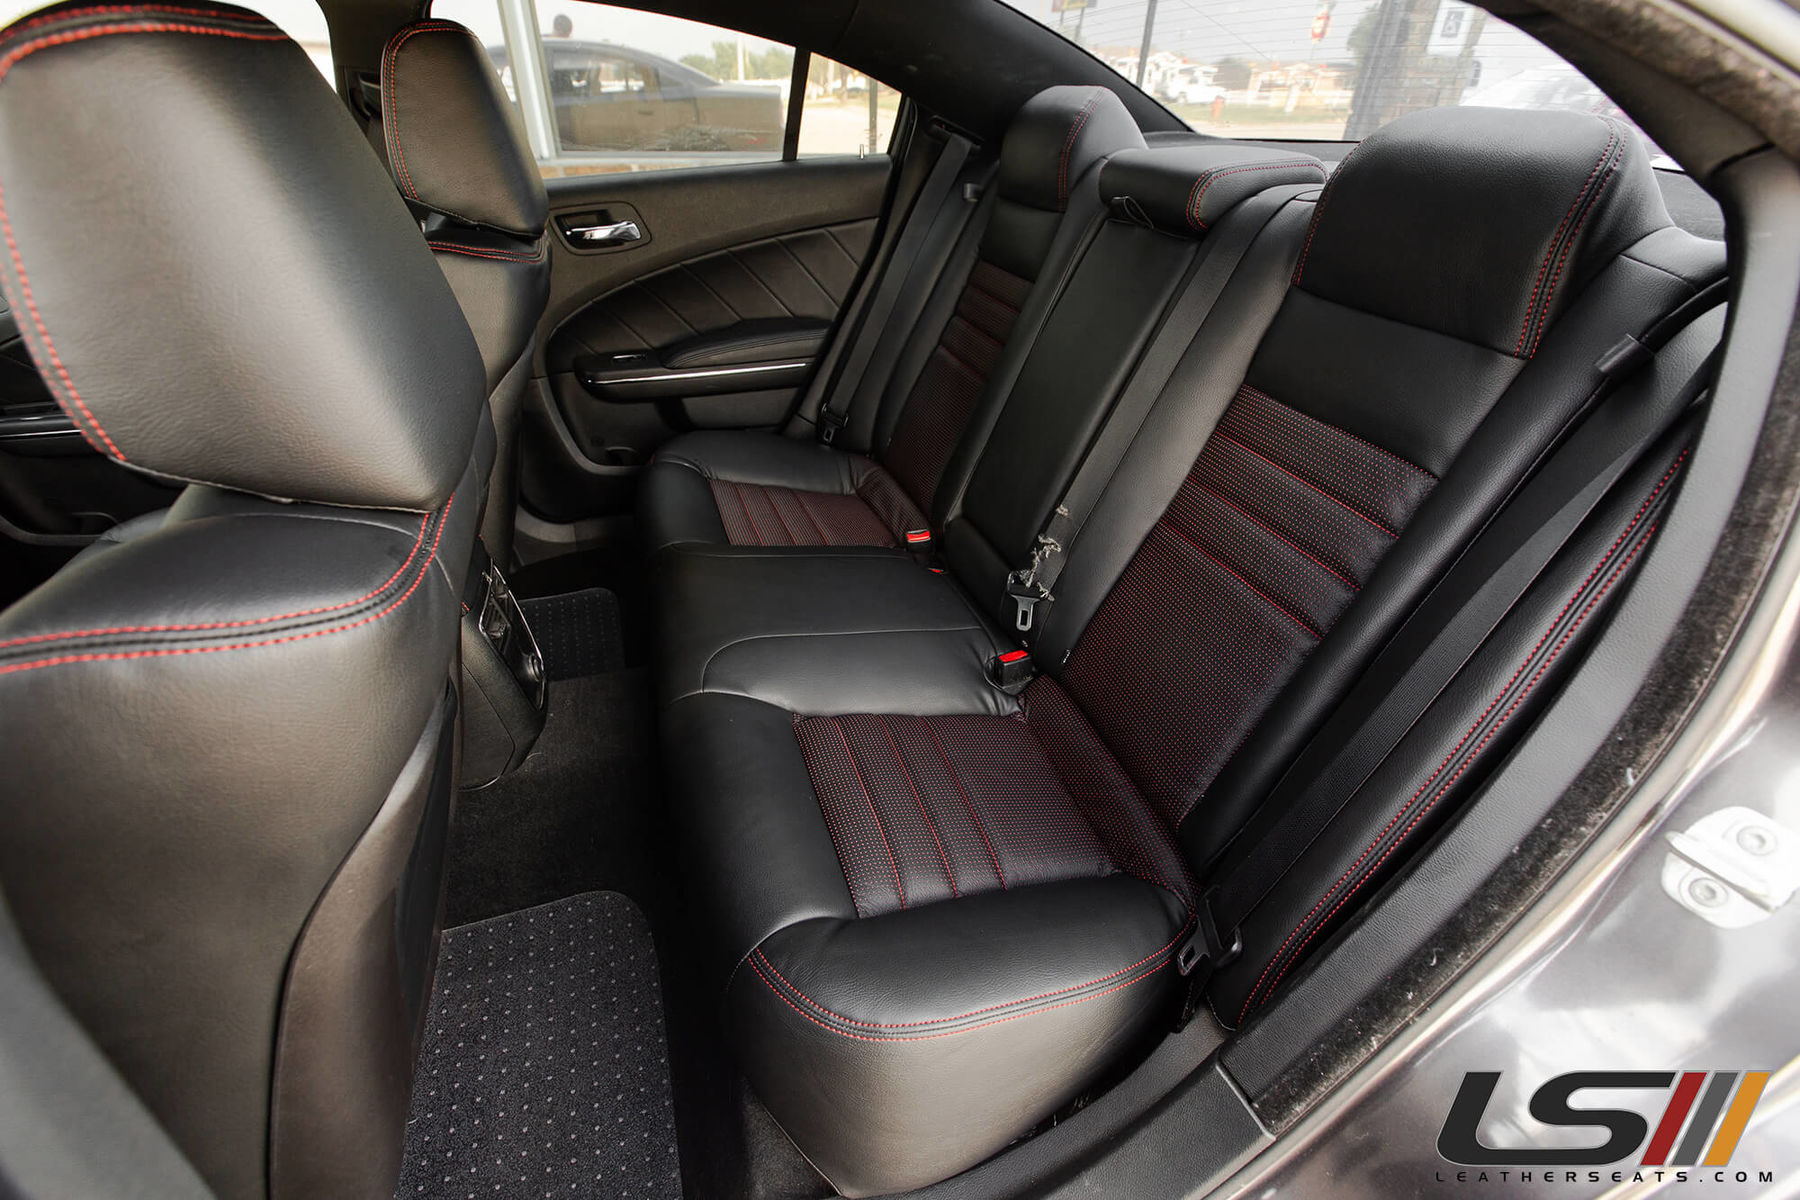 2012 Dodge Charger Interior By Leatherseats Com